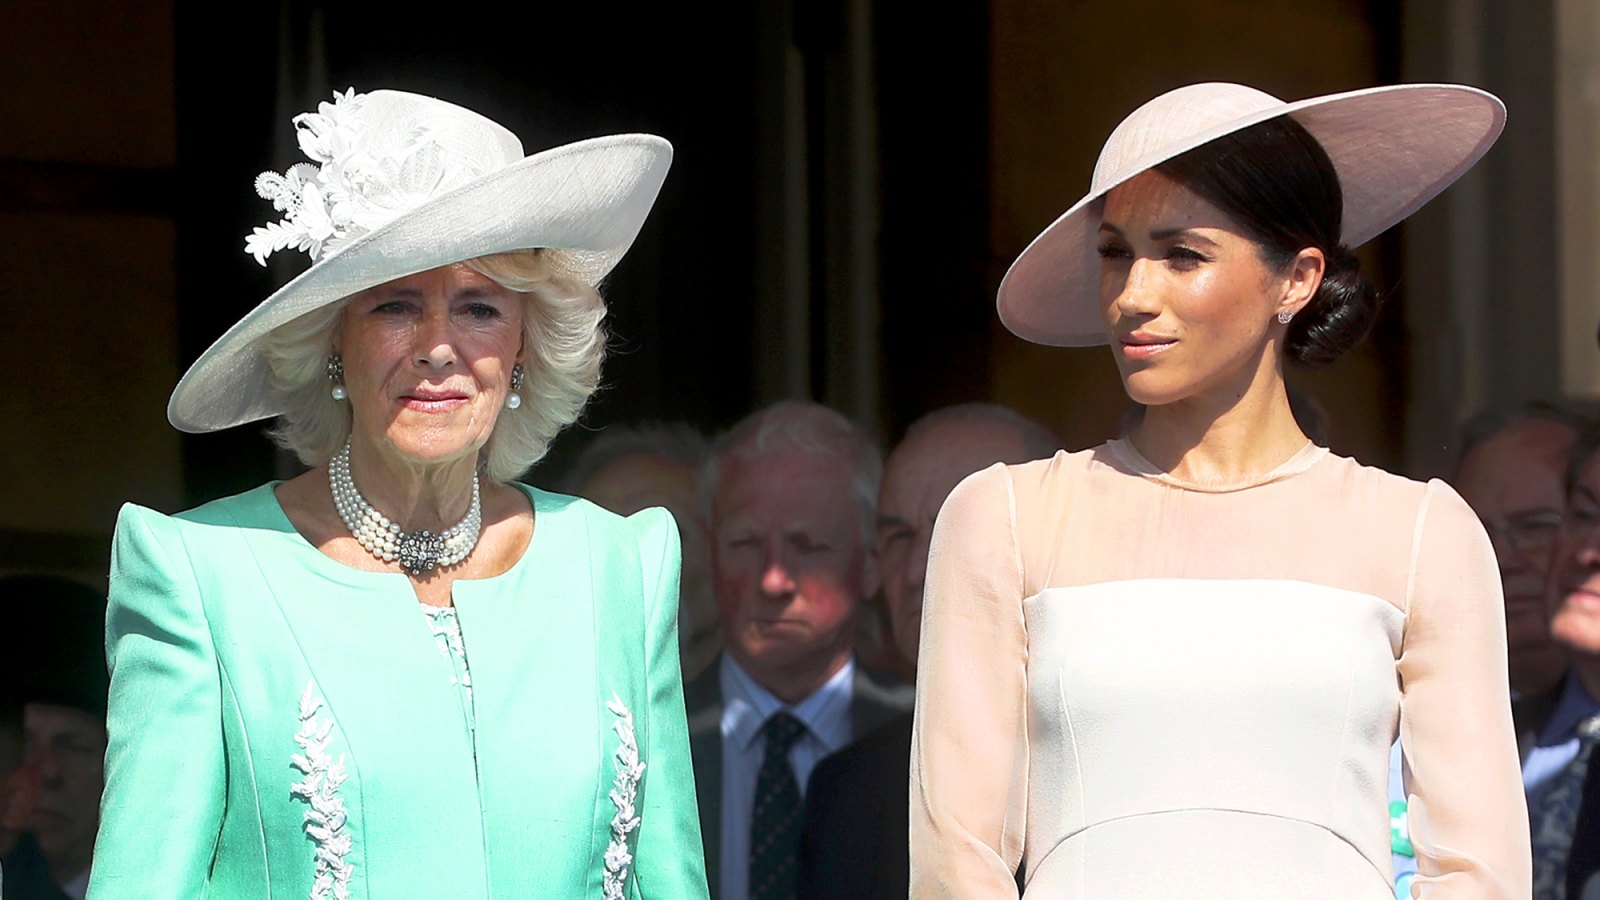 Camilla, Duchess of Cornwall and Meghan, Duchess of Sussex attend The Prince of Wales' 70th Birthday Patronage Celebration held at Buckingham Palace on May 22, 2018 in London, England.